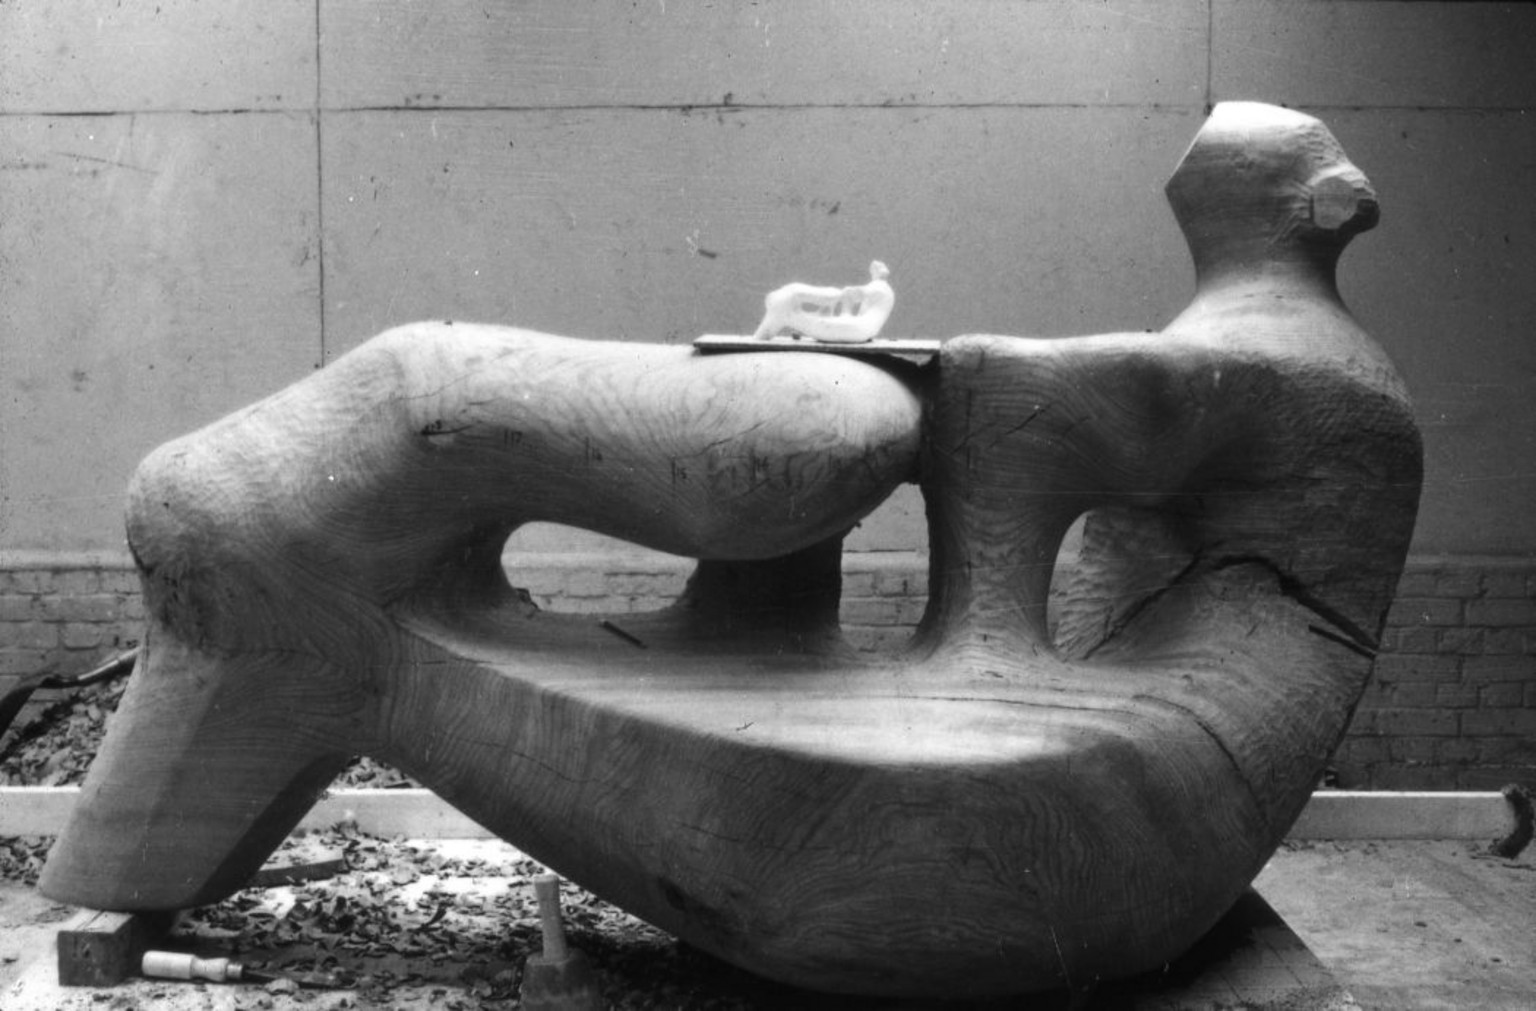 Ann Compton, \'\'An rhythm\': essentially Identity) Public Moore\'s (Henry different Henry kind and Sculpture of Process Wood\' in Moore: | Rediscovering Tate Sculptural